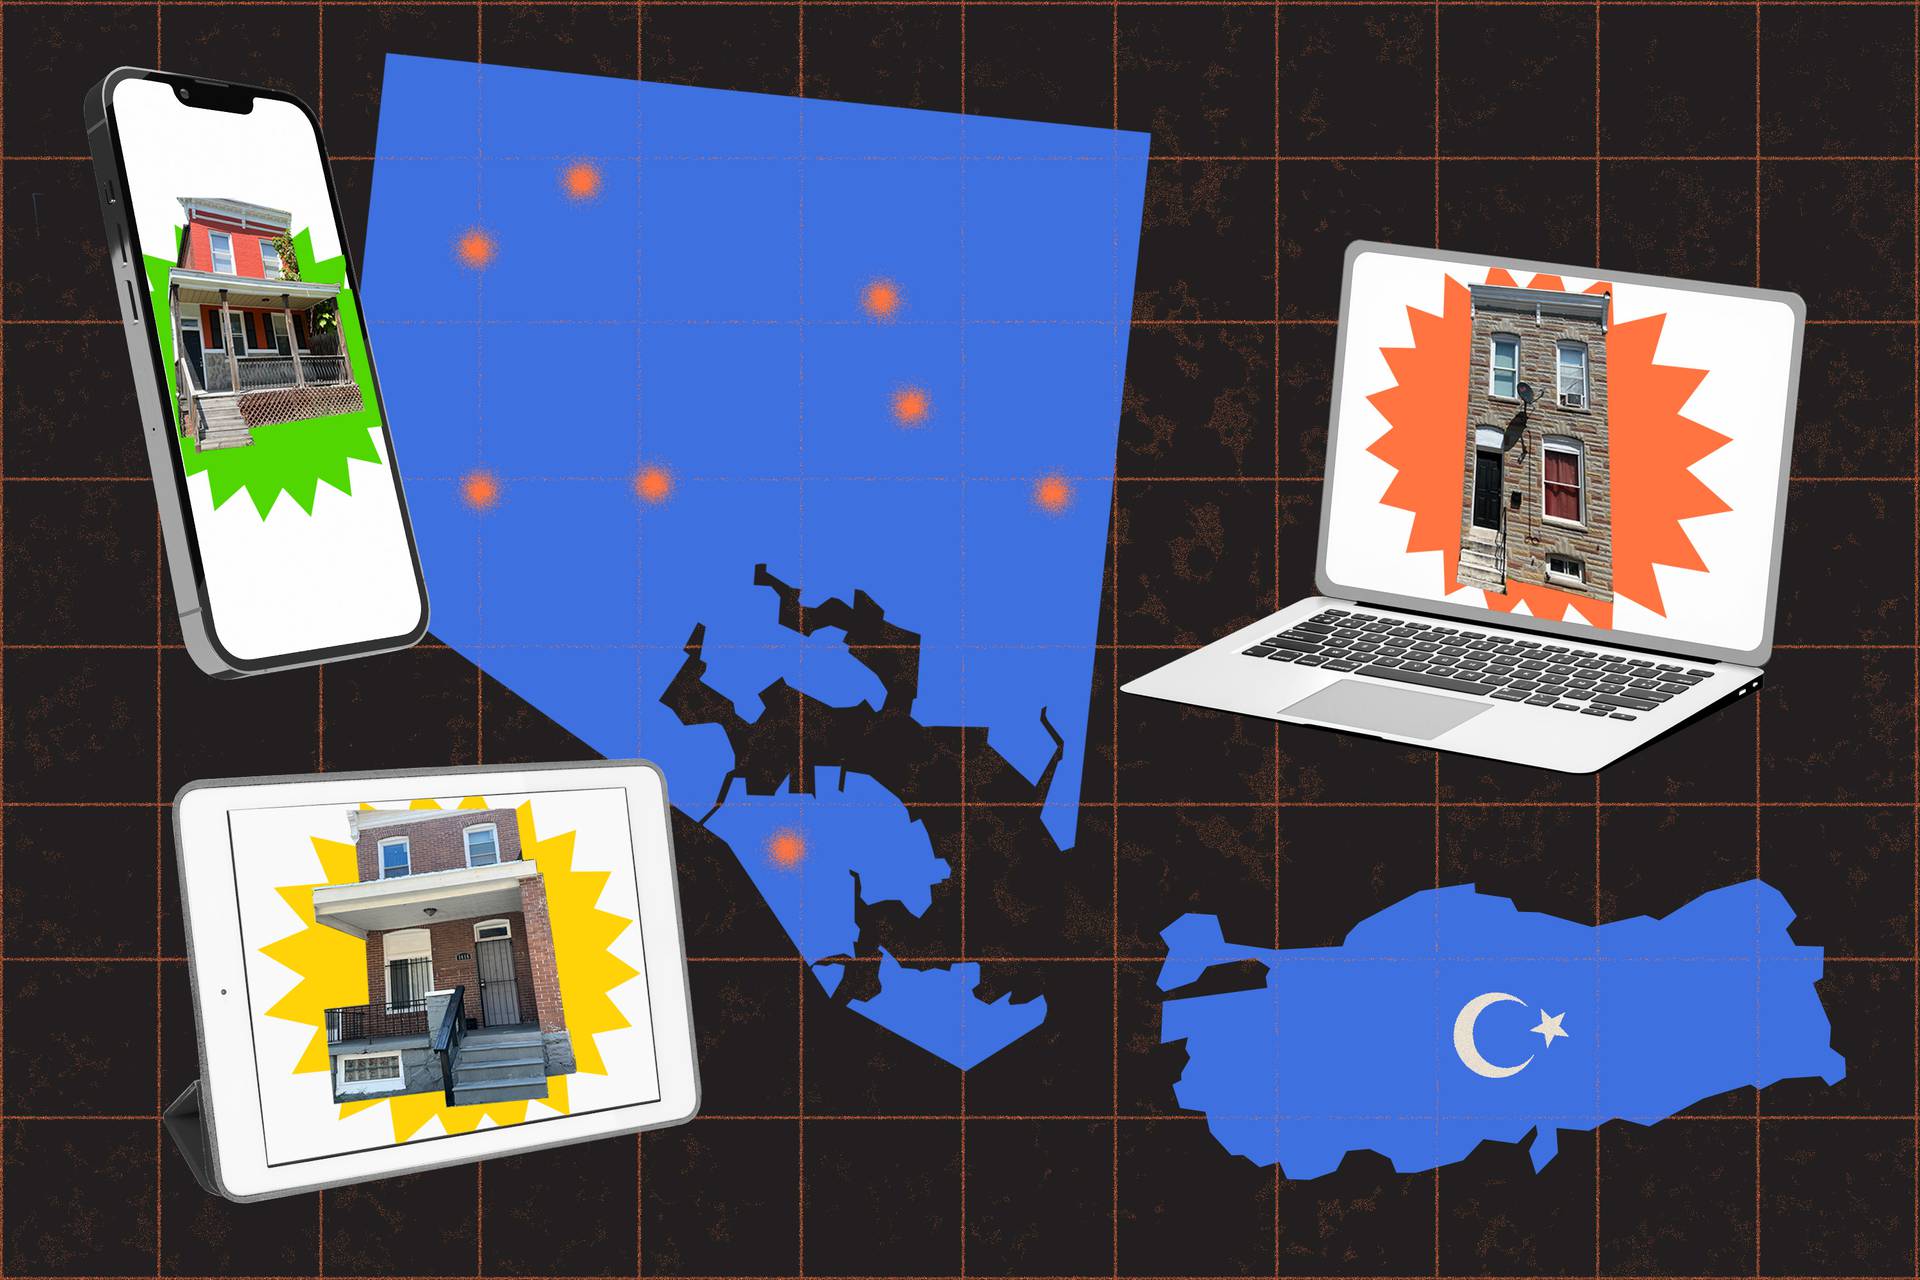 Illustration of laptop, tablet, and phone with ads of Baltimore row homes on their screens, with map of Baltimore and map of Turkey in background.